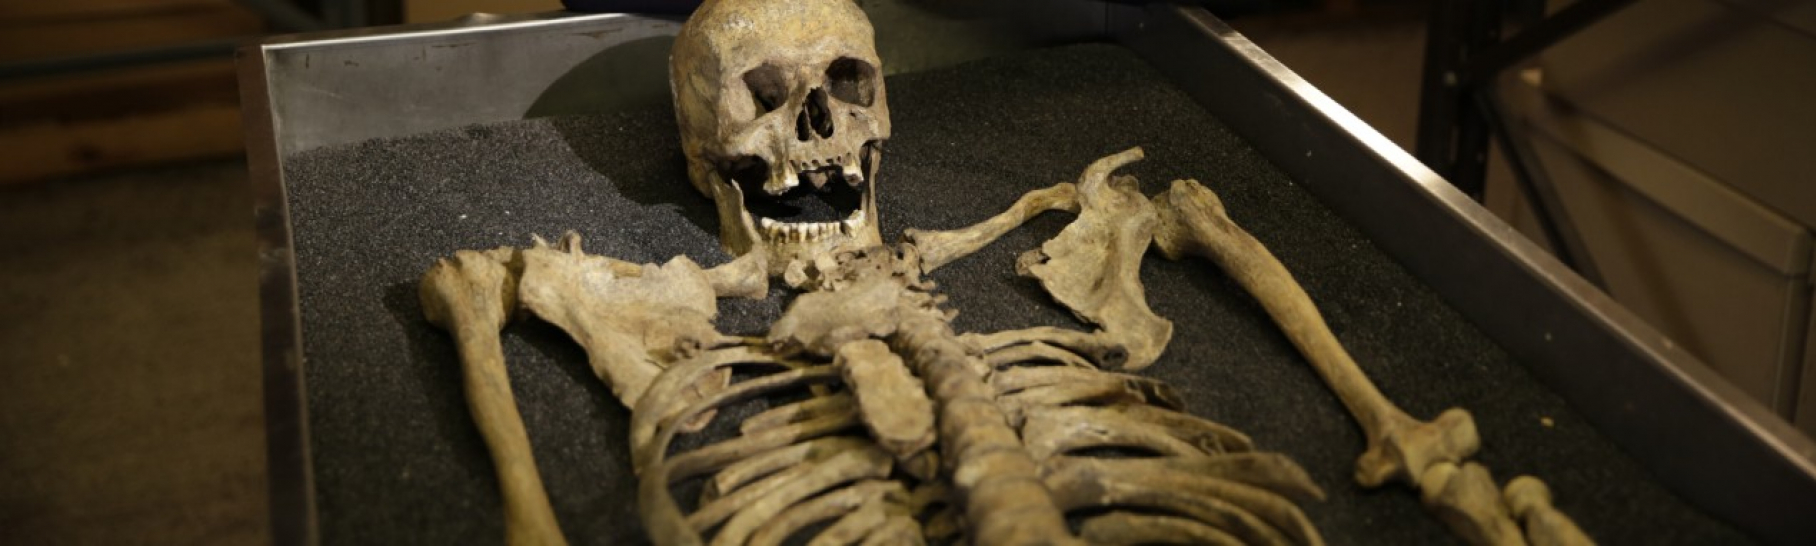 Skeleton from The Black Death episode of Lucy Worsley Investigates